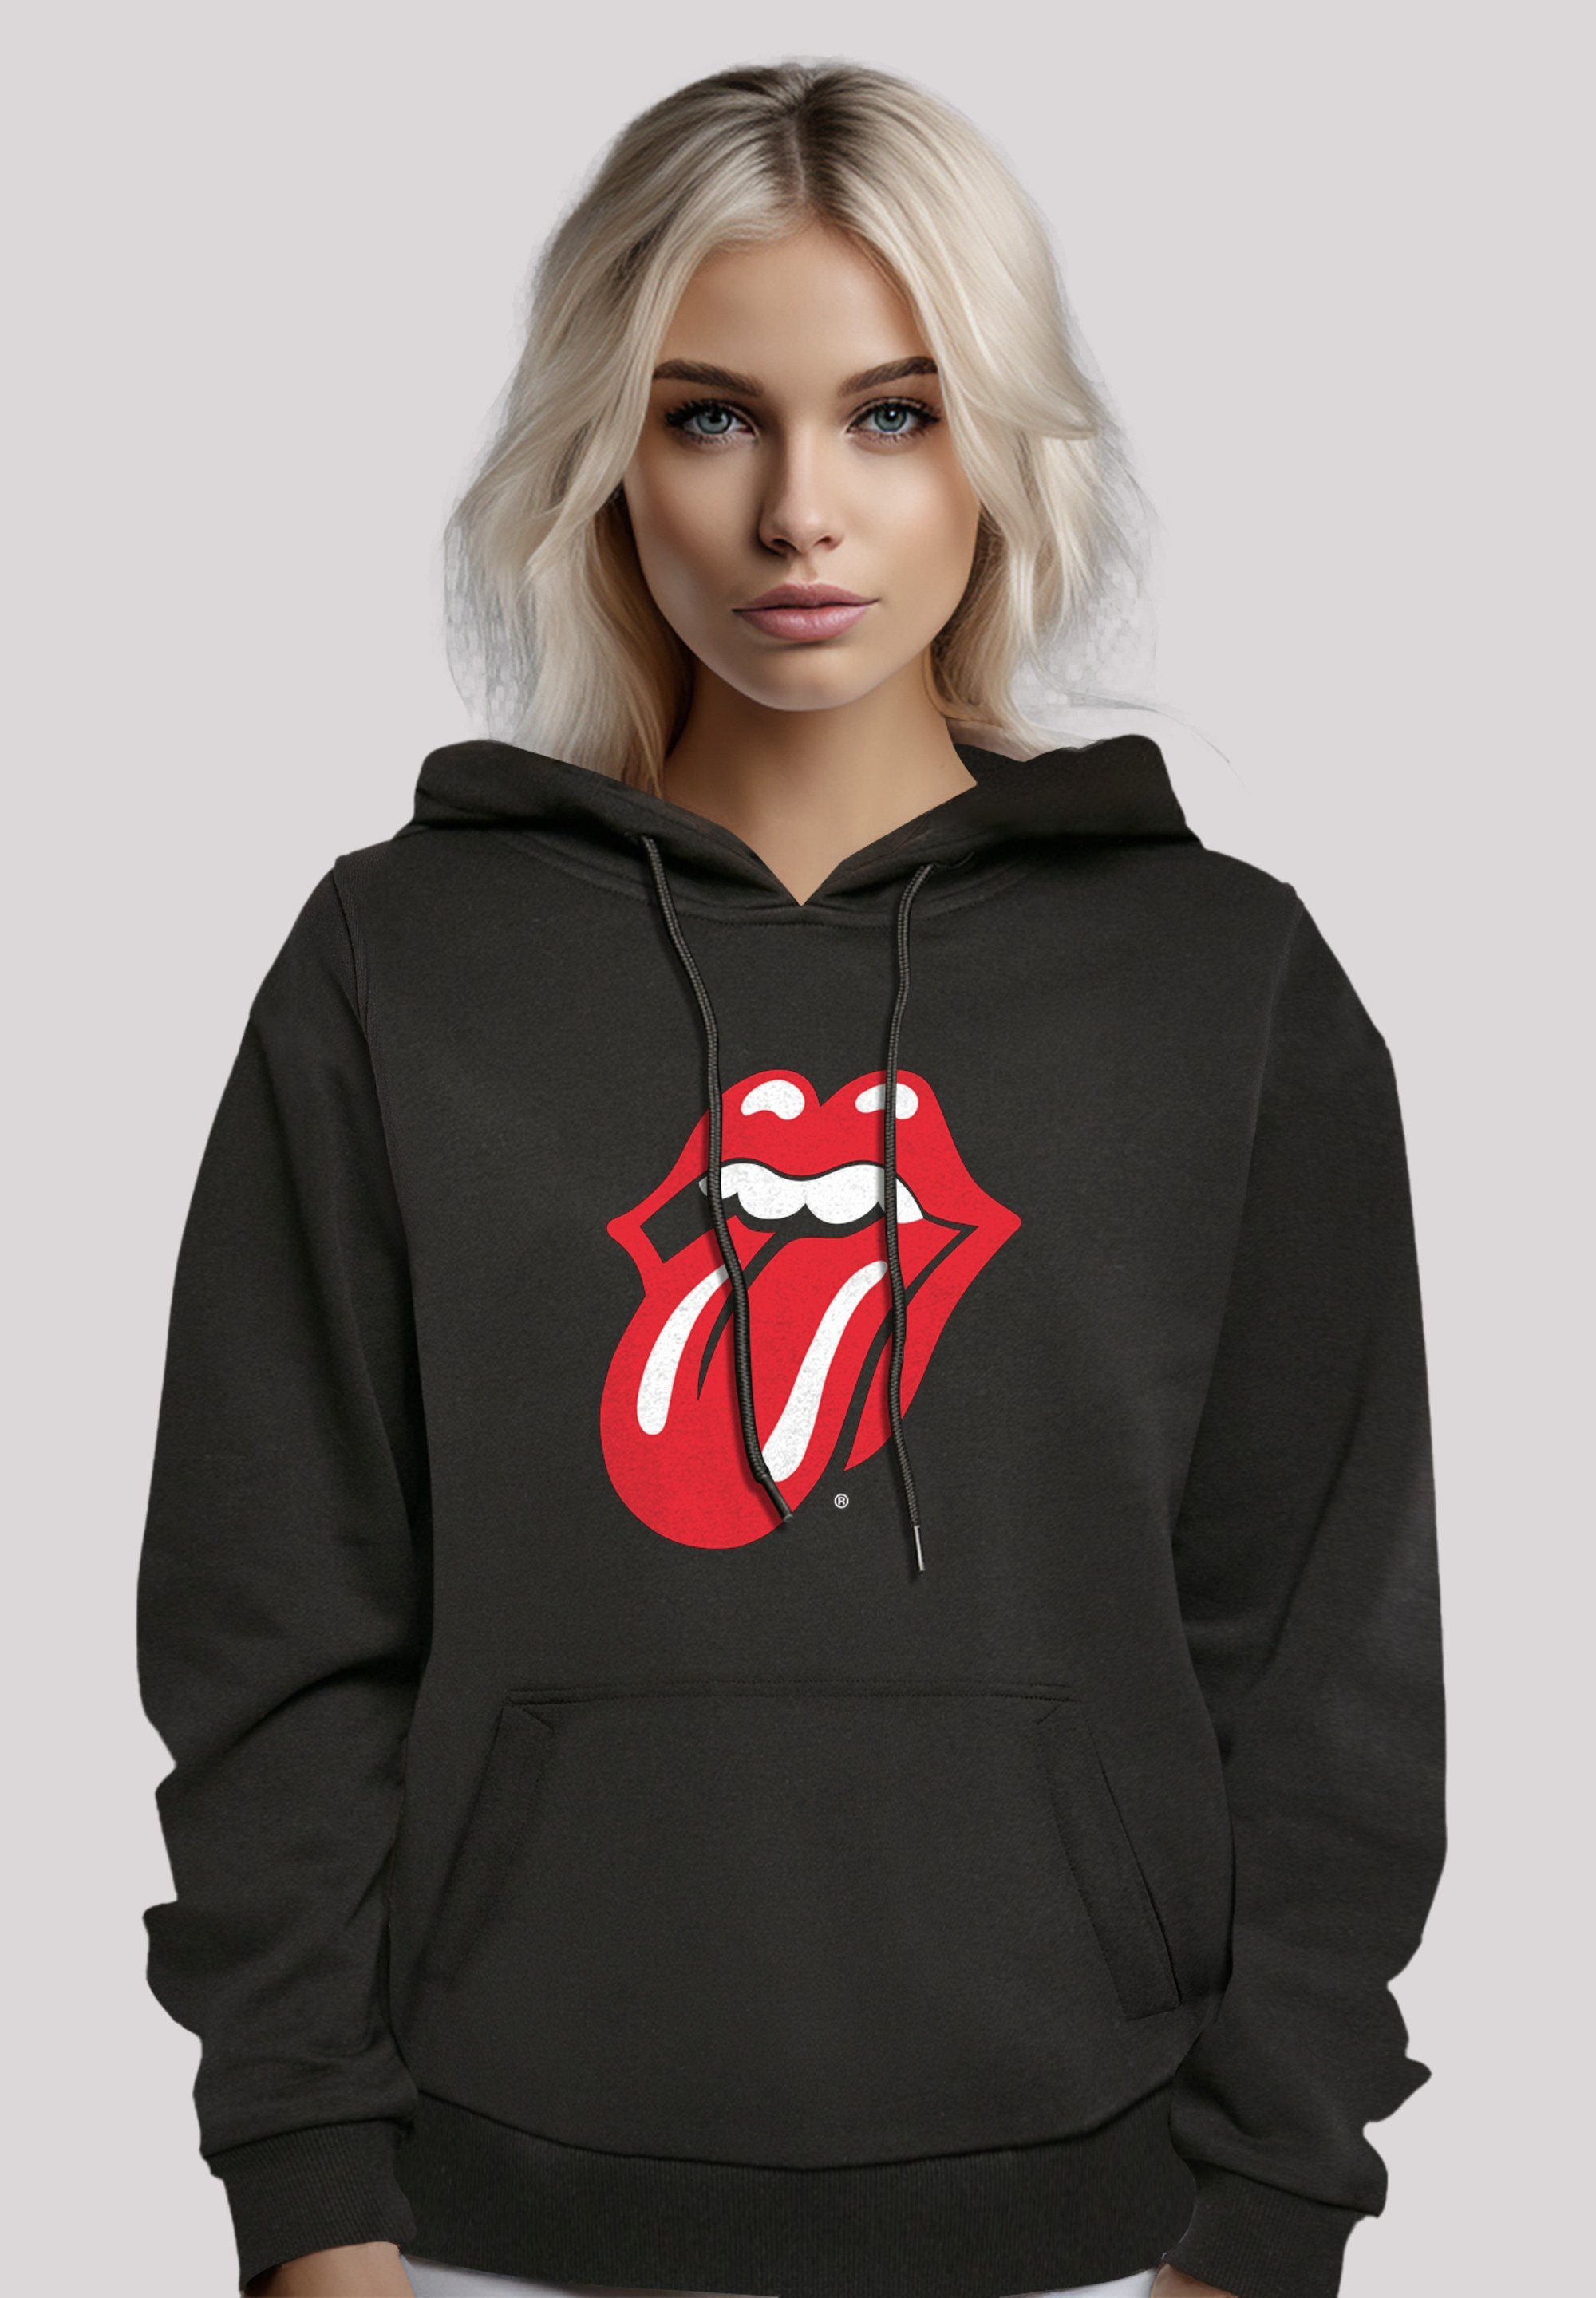 schwarz Rolling The Kapuzenpullover Warm, Band Rock Zunge Classic Stones Musik Bequem F4NT4STIC Hoodie,